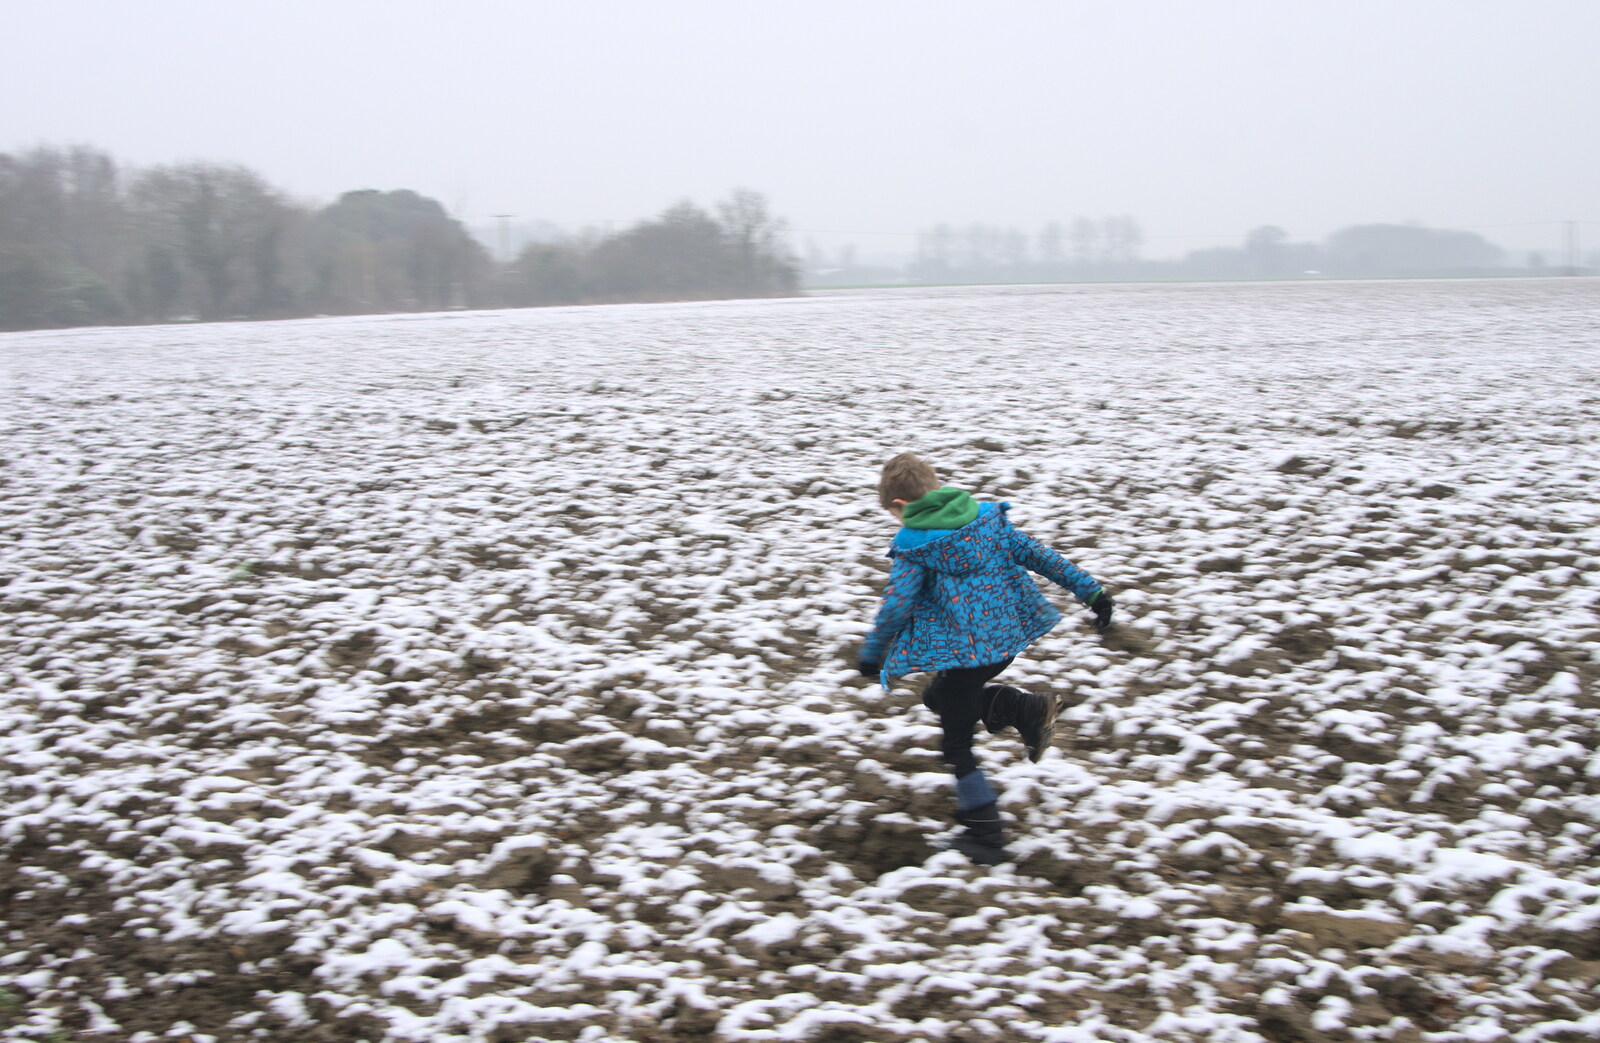 Fred runs off from A Snowy Day, Brome, Suffolk - 12th February 2017